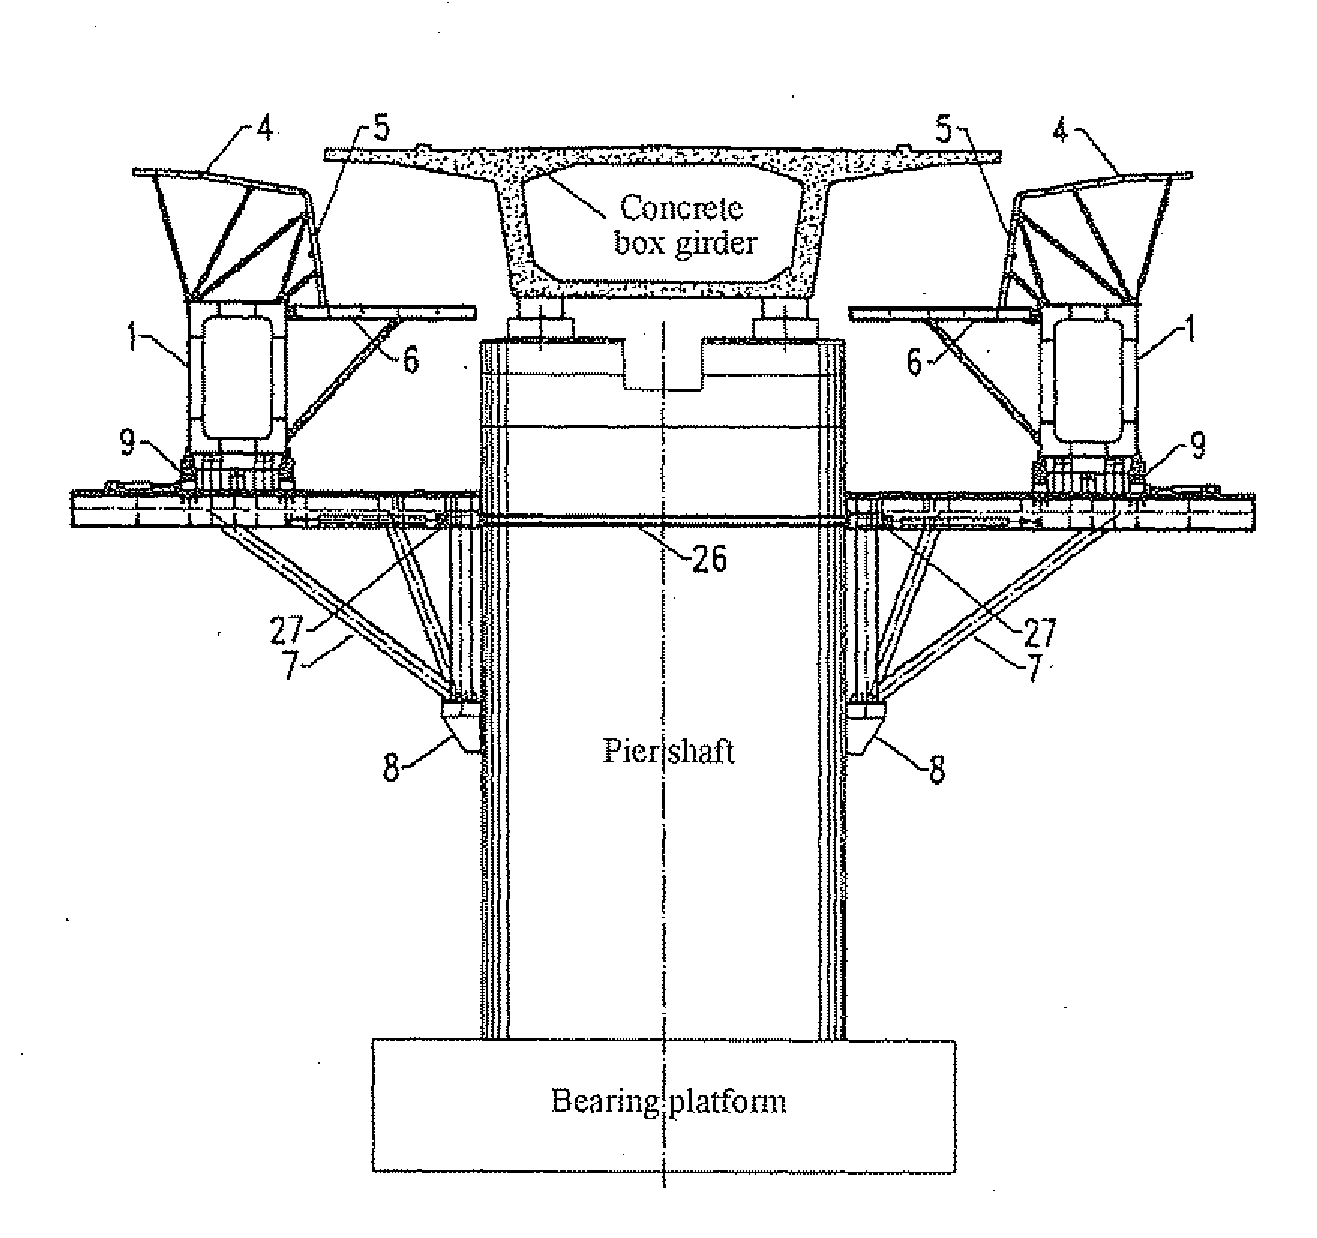 Upper-bearing typed movable formwork